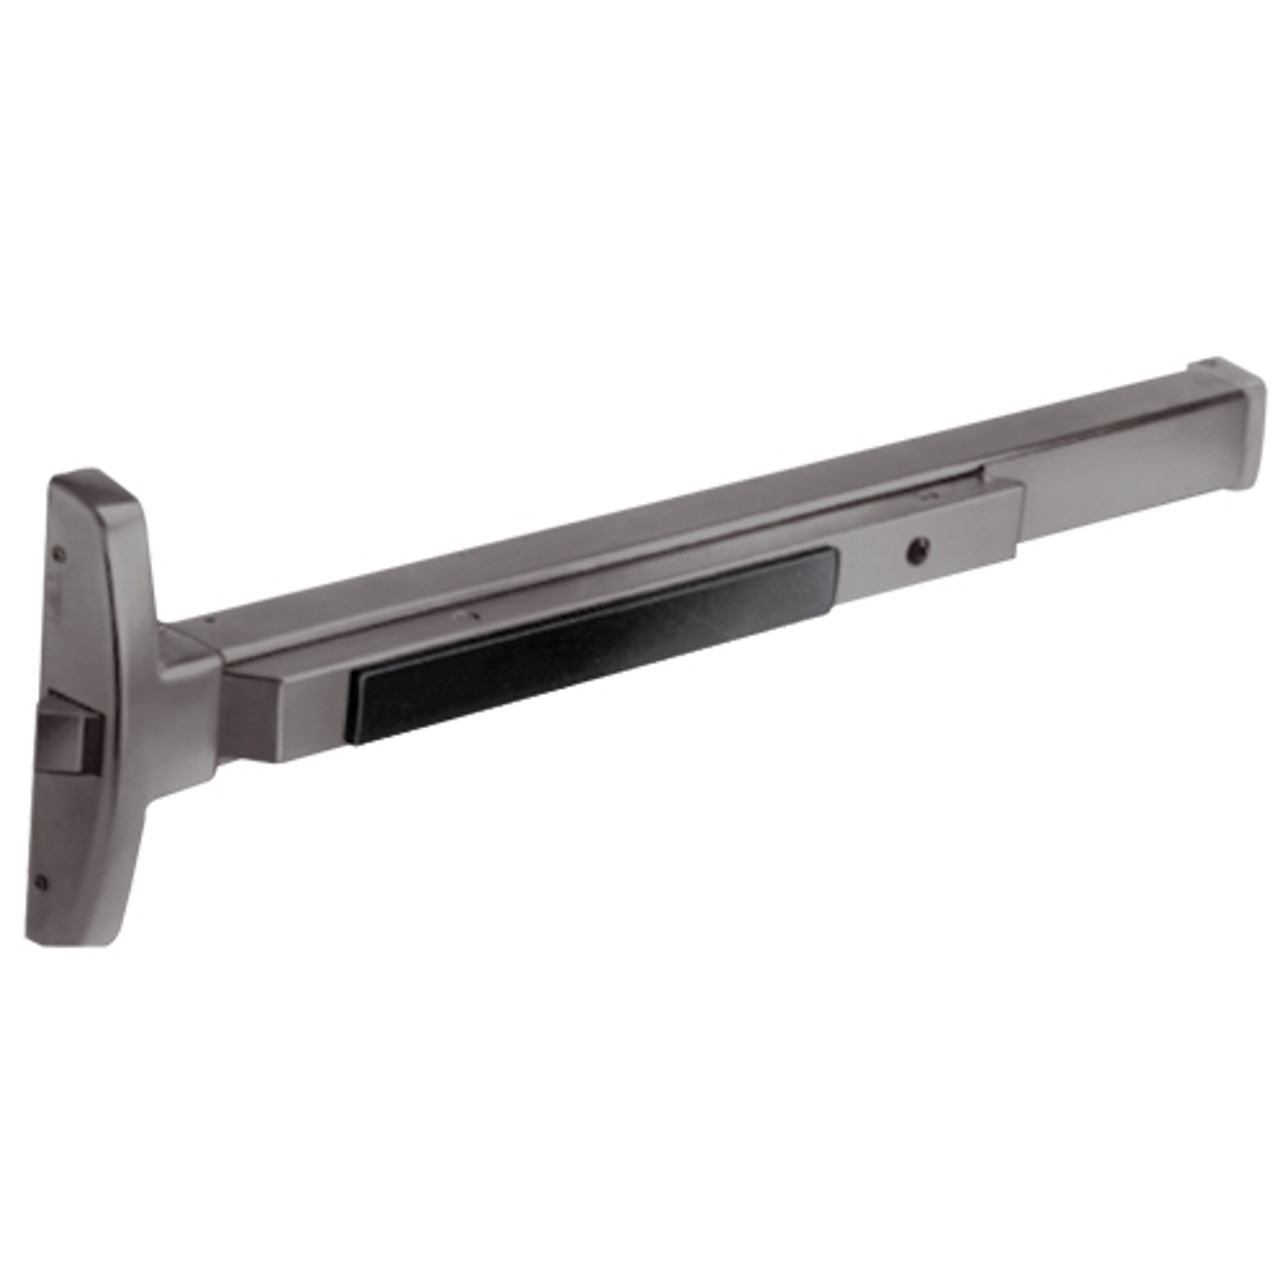 8510G-RHR-32D Sargent 80 Series Exit Only Narrow Stile Rim Exit Device in Satin Stainless Steel